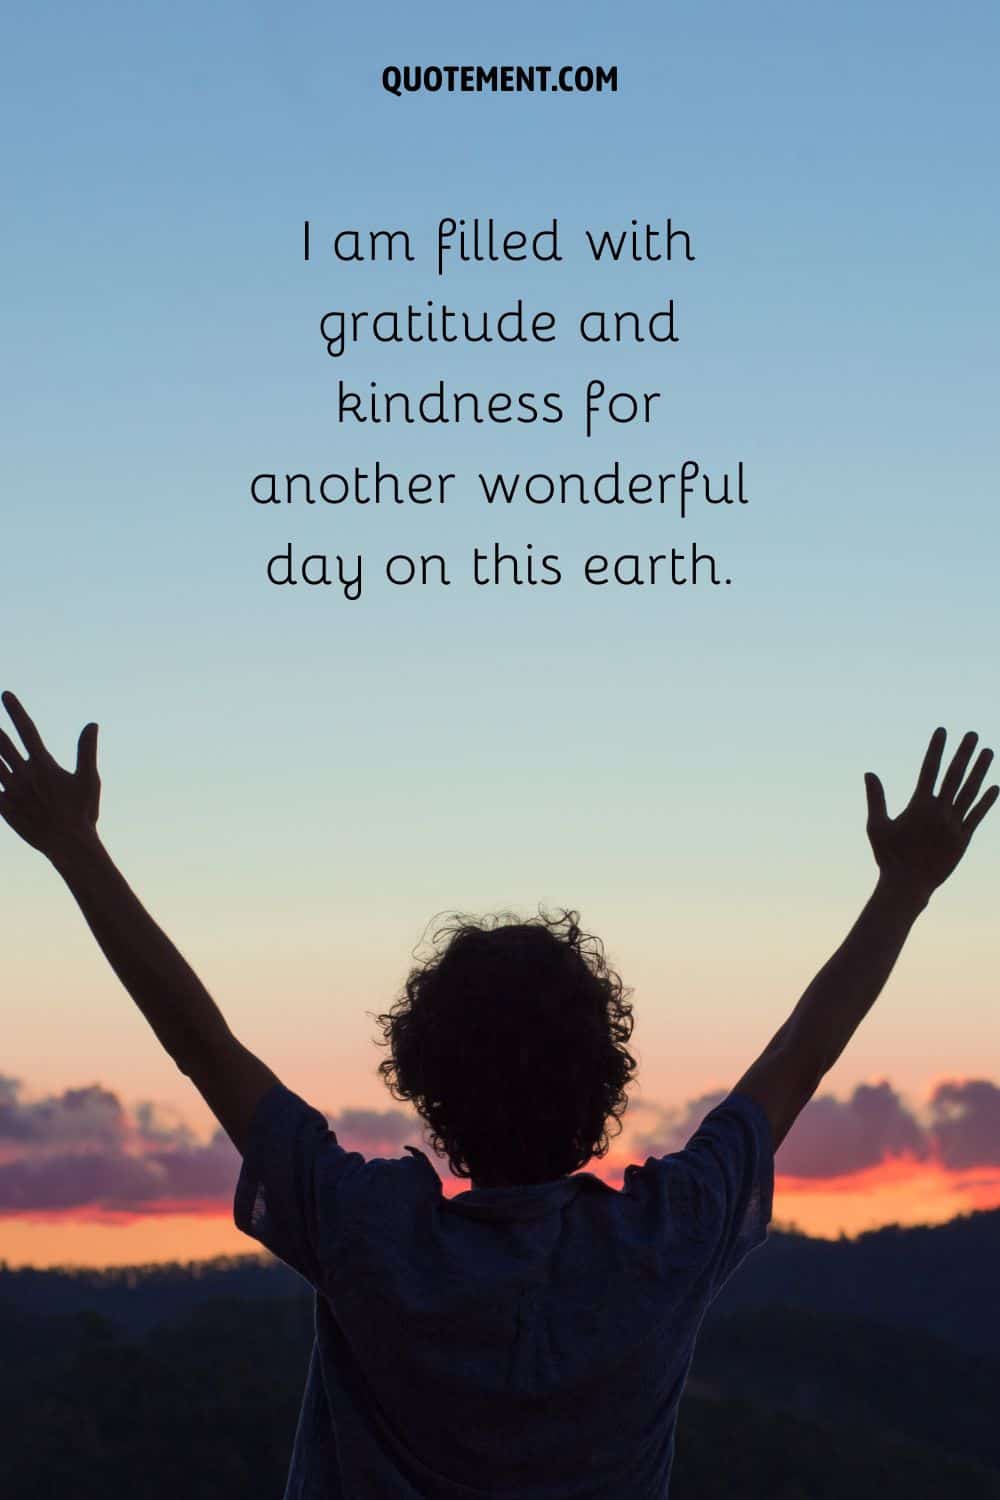 I am filled with gratitude and kindness for another wonderful day on this earth.